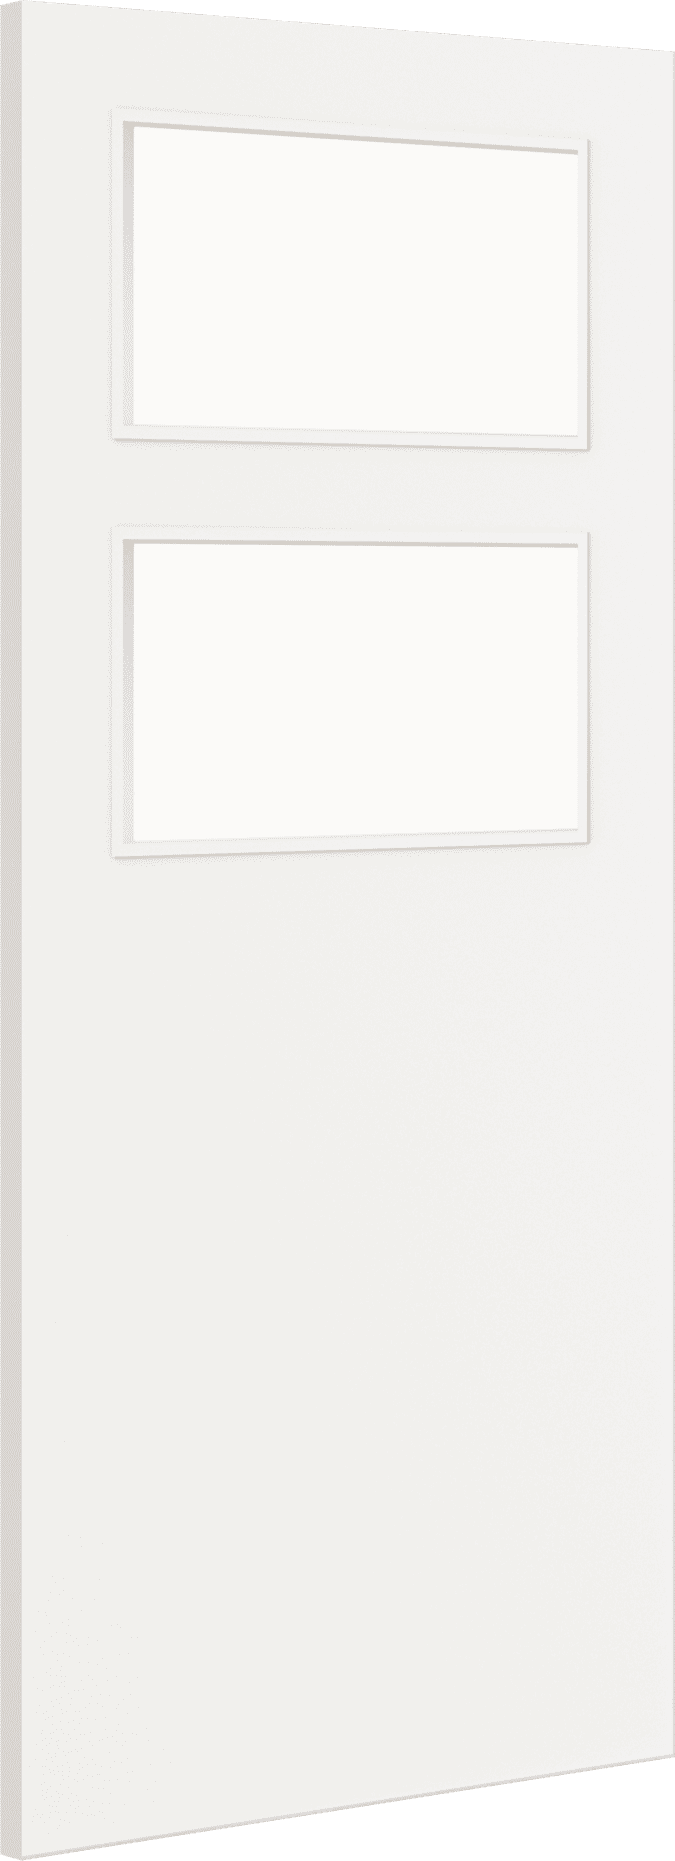 1981mm x 686mm x 44mm (27") Architectural Paint Grade White 02 Clear Glazed Fire Door Blank